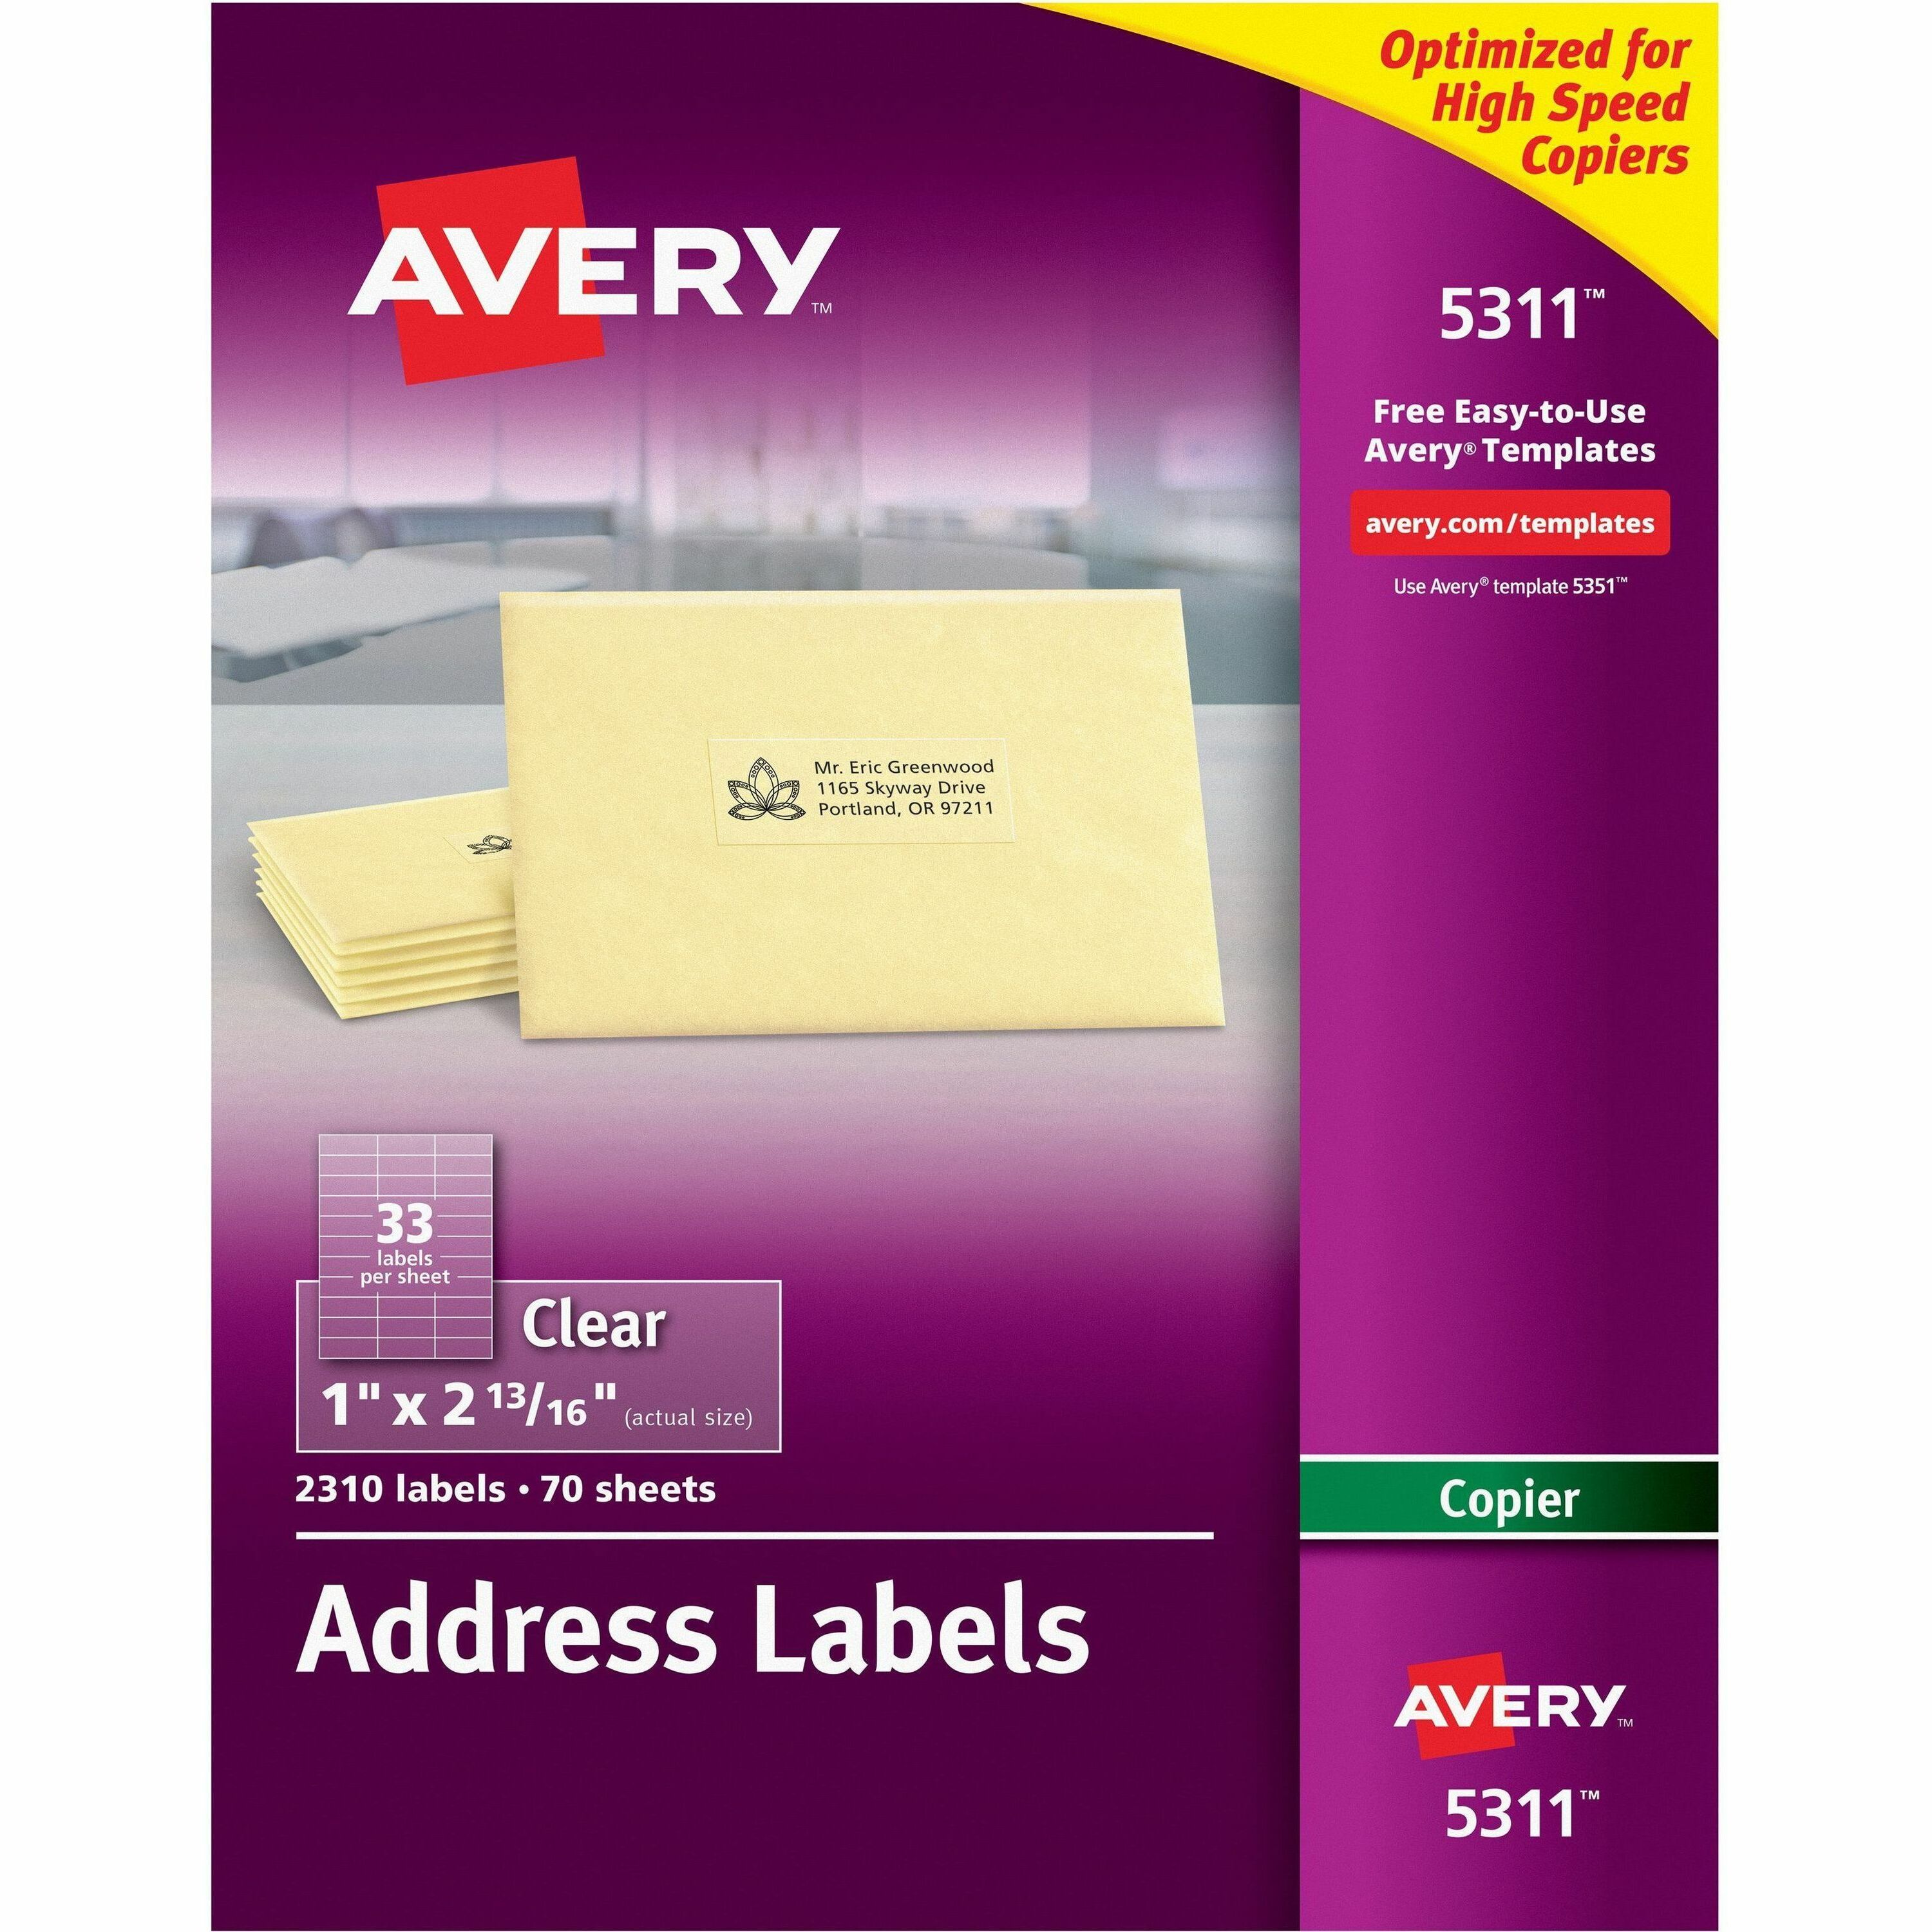 free avery address label software for mac 10.7